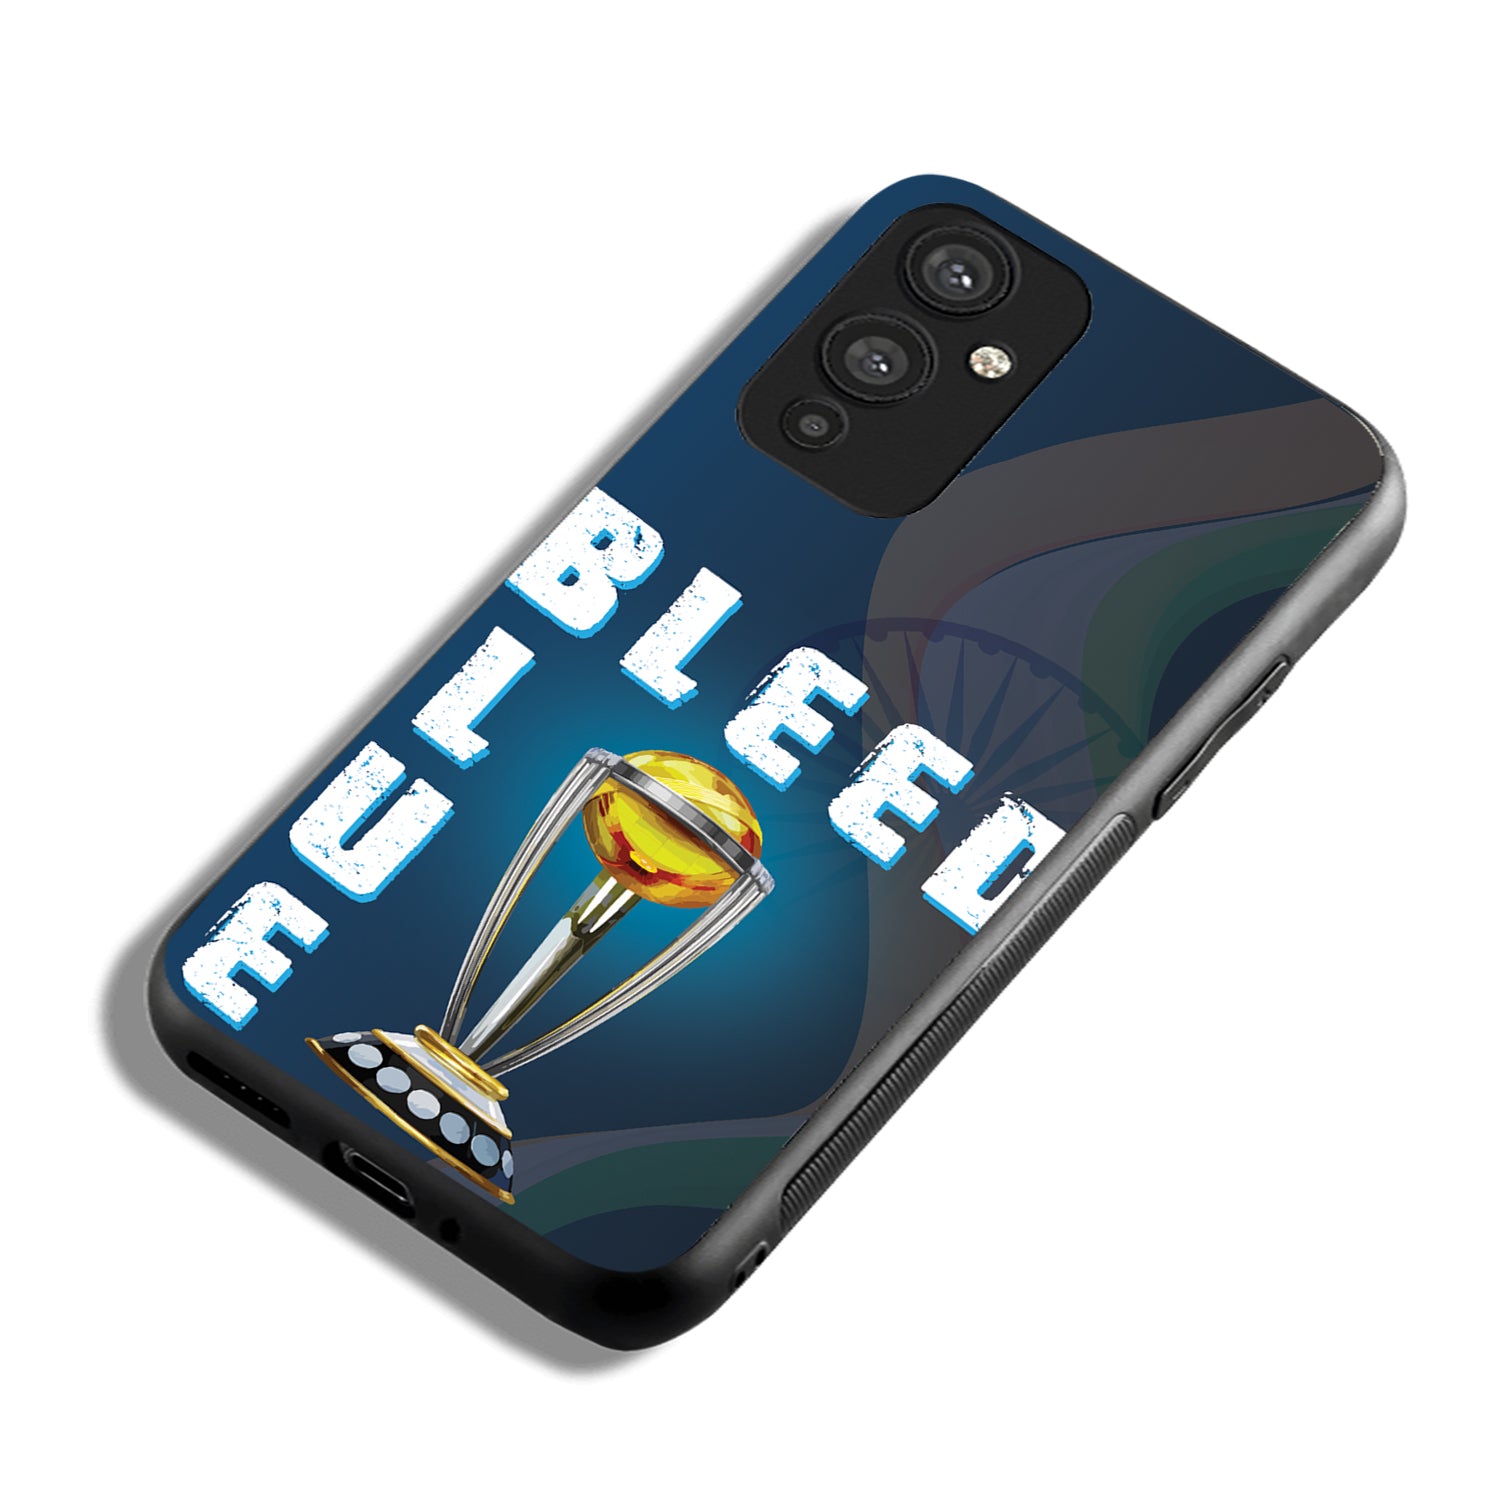 Bleed Blue Sports Oneplus 9 Back Case